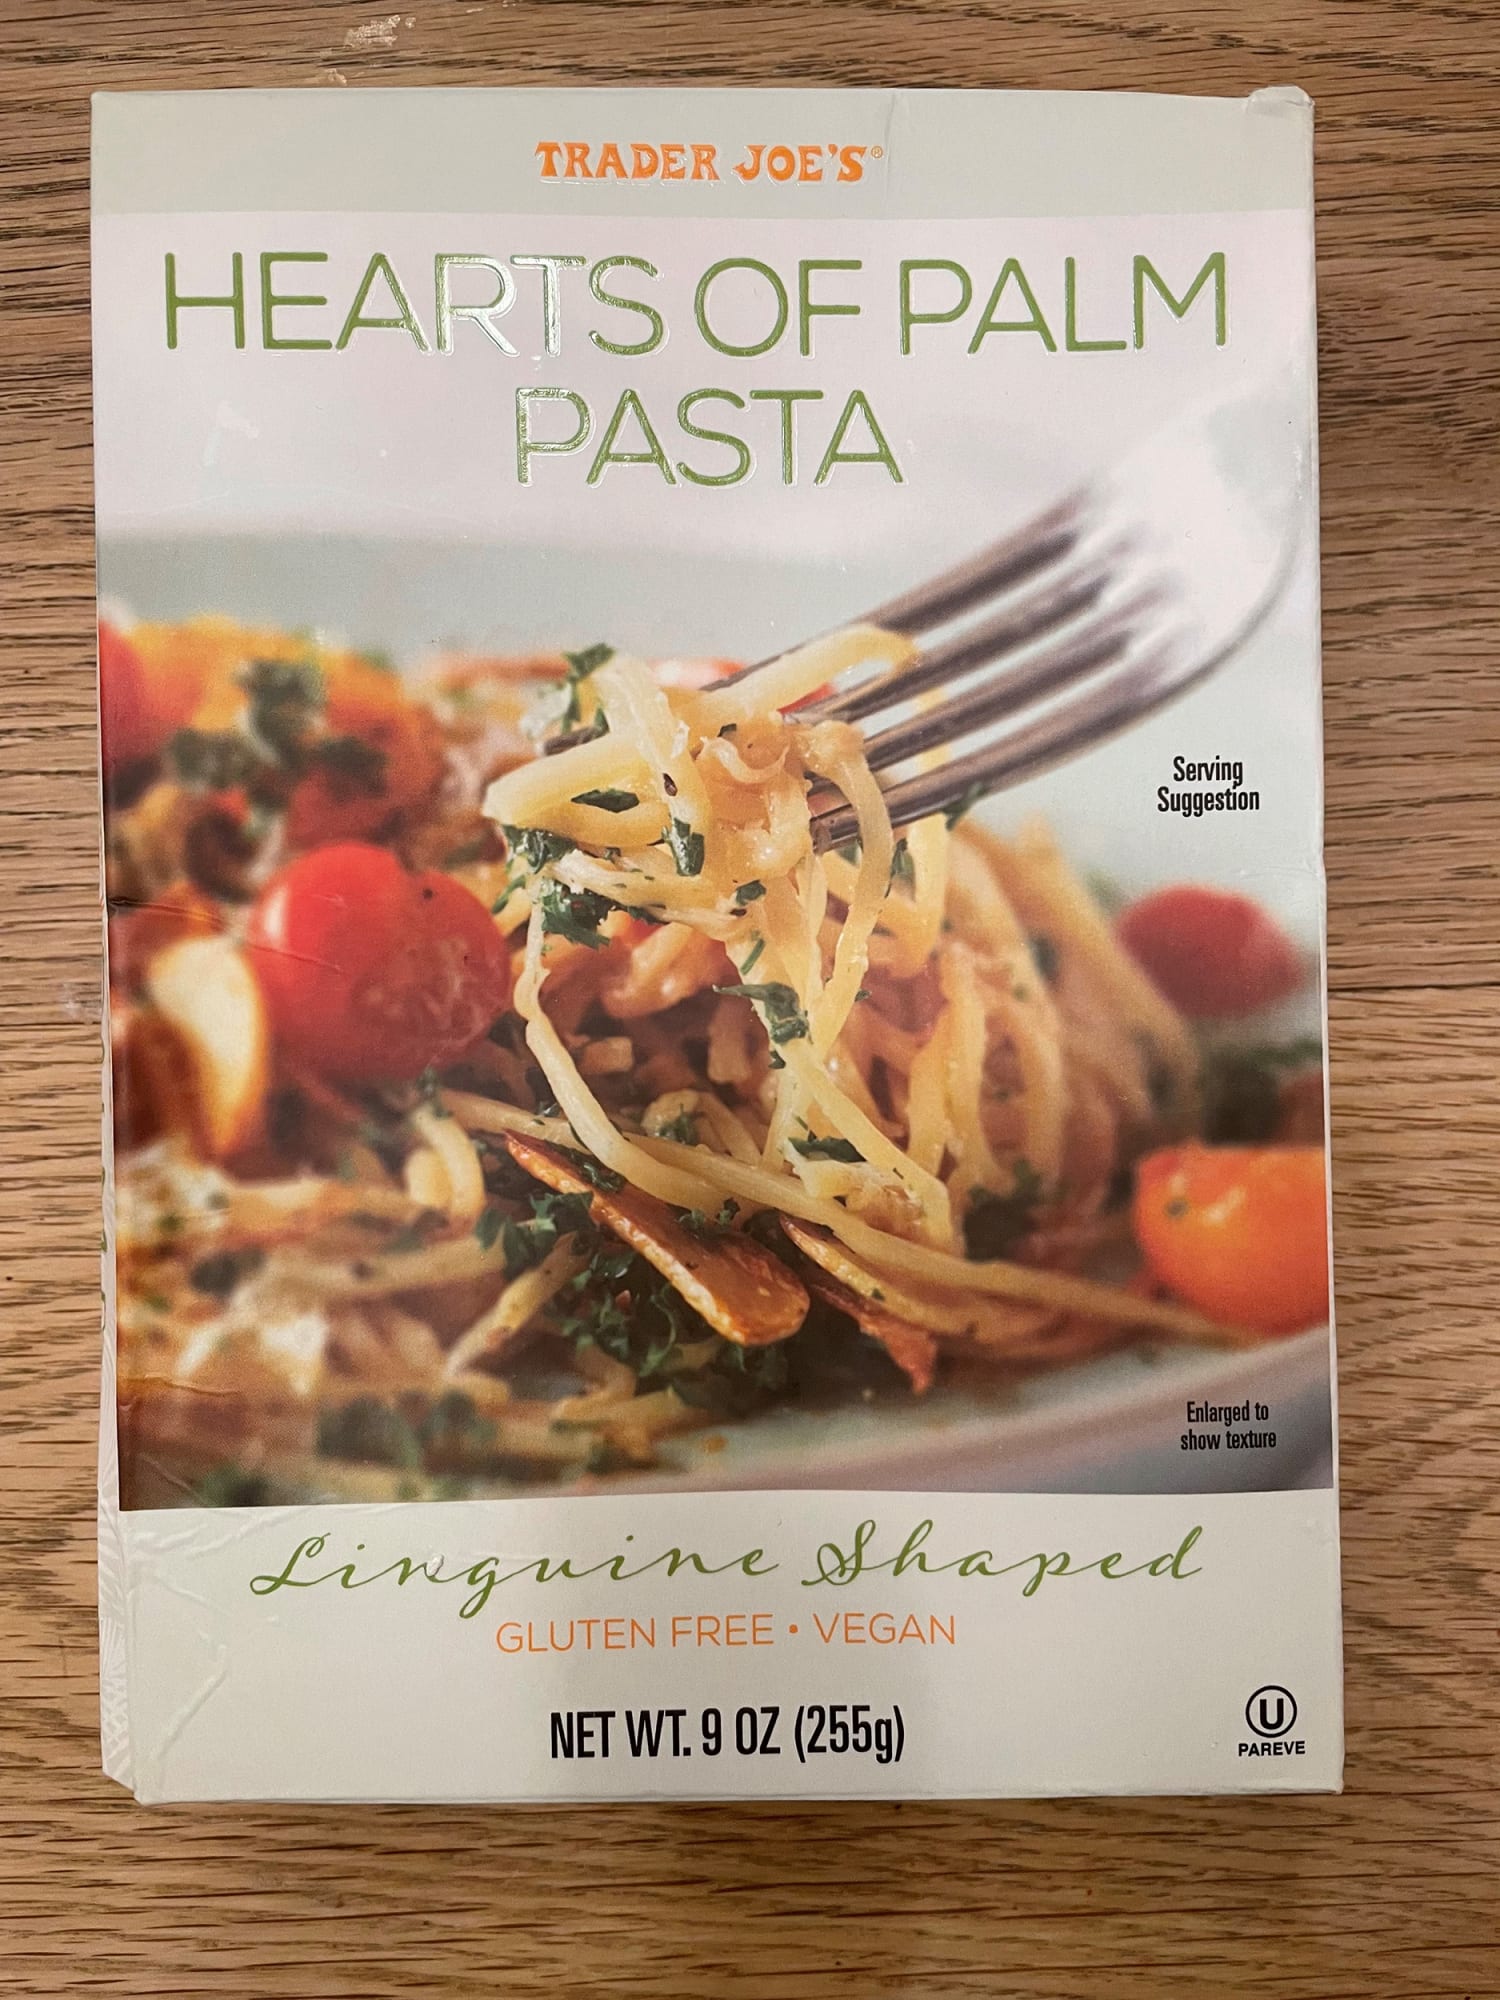 We tried Trader Joe's Hearts of Palm Pasta. Here's our honest review